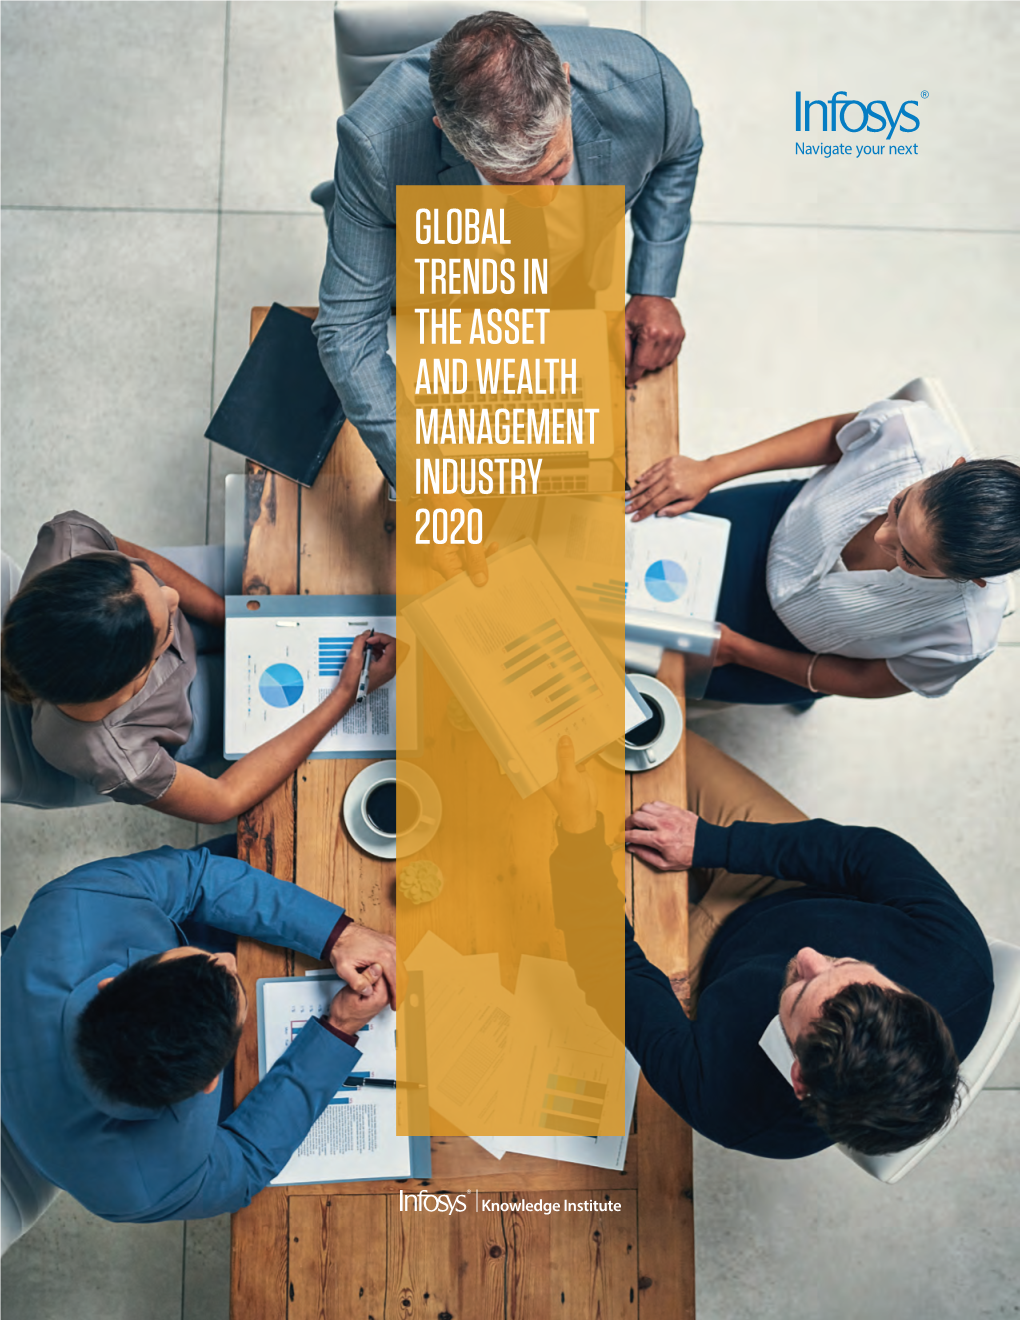 Global Trends in the Asset and Wealth Management Industry 2020